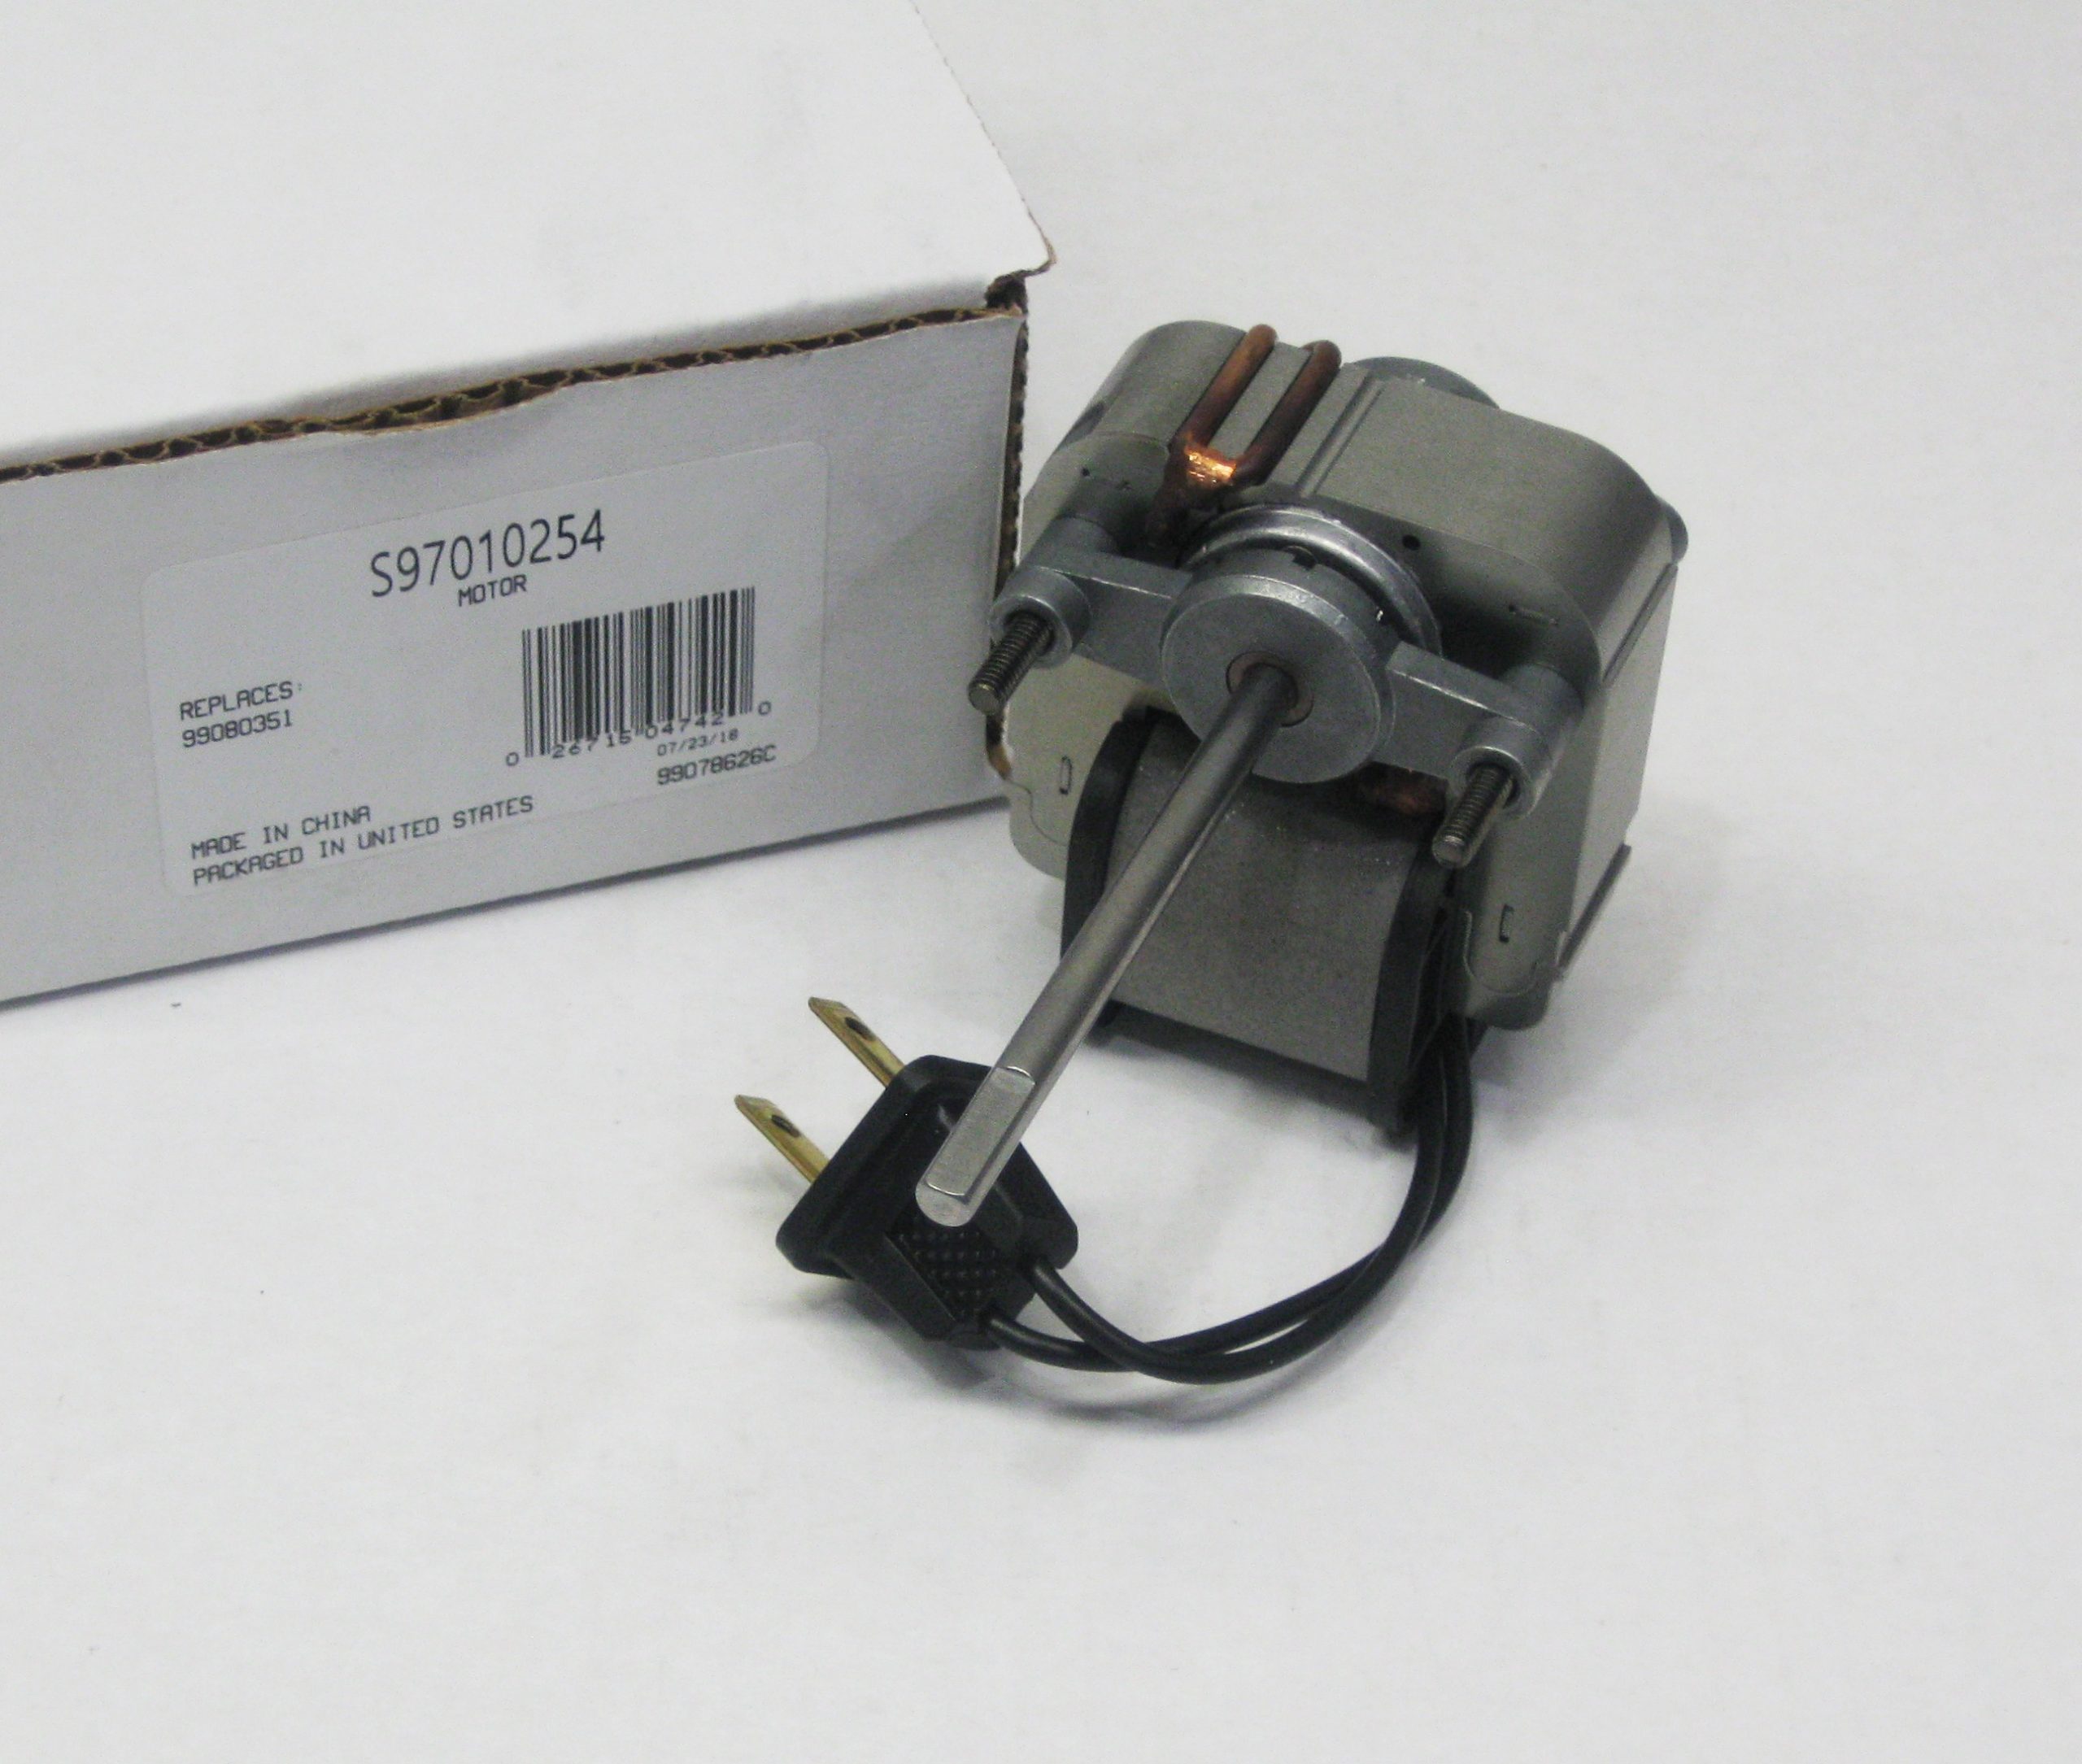 Details About 97010254 Broan Nutone Vent Bath Fan Motor For Models 99080351 162 164 in dimensions 2583 X 2188